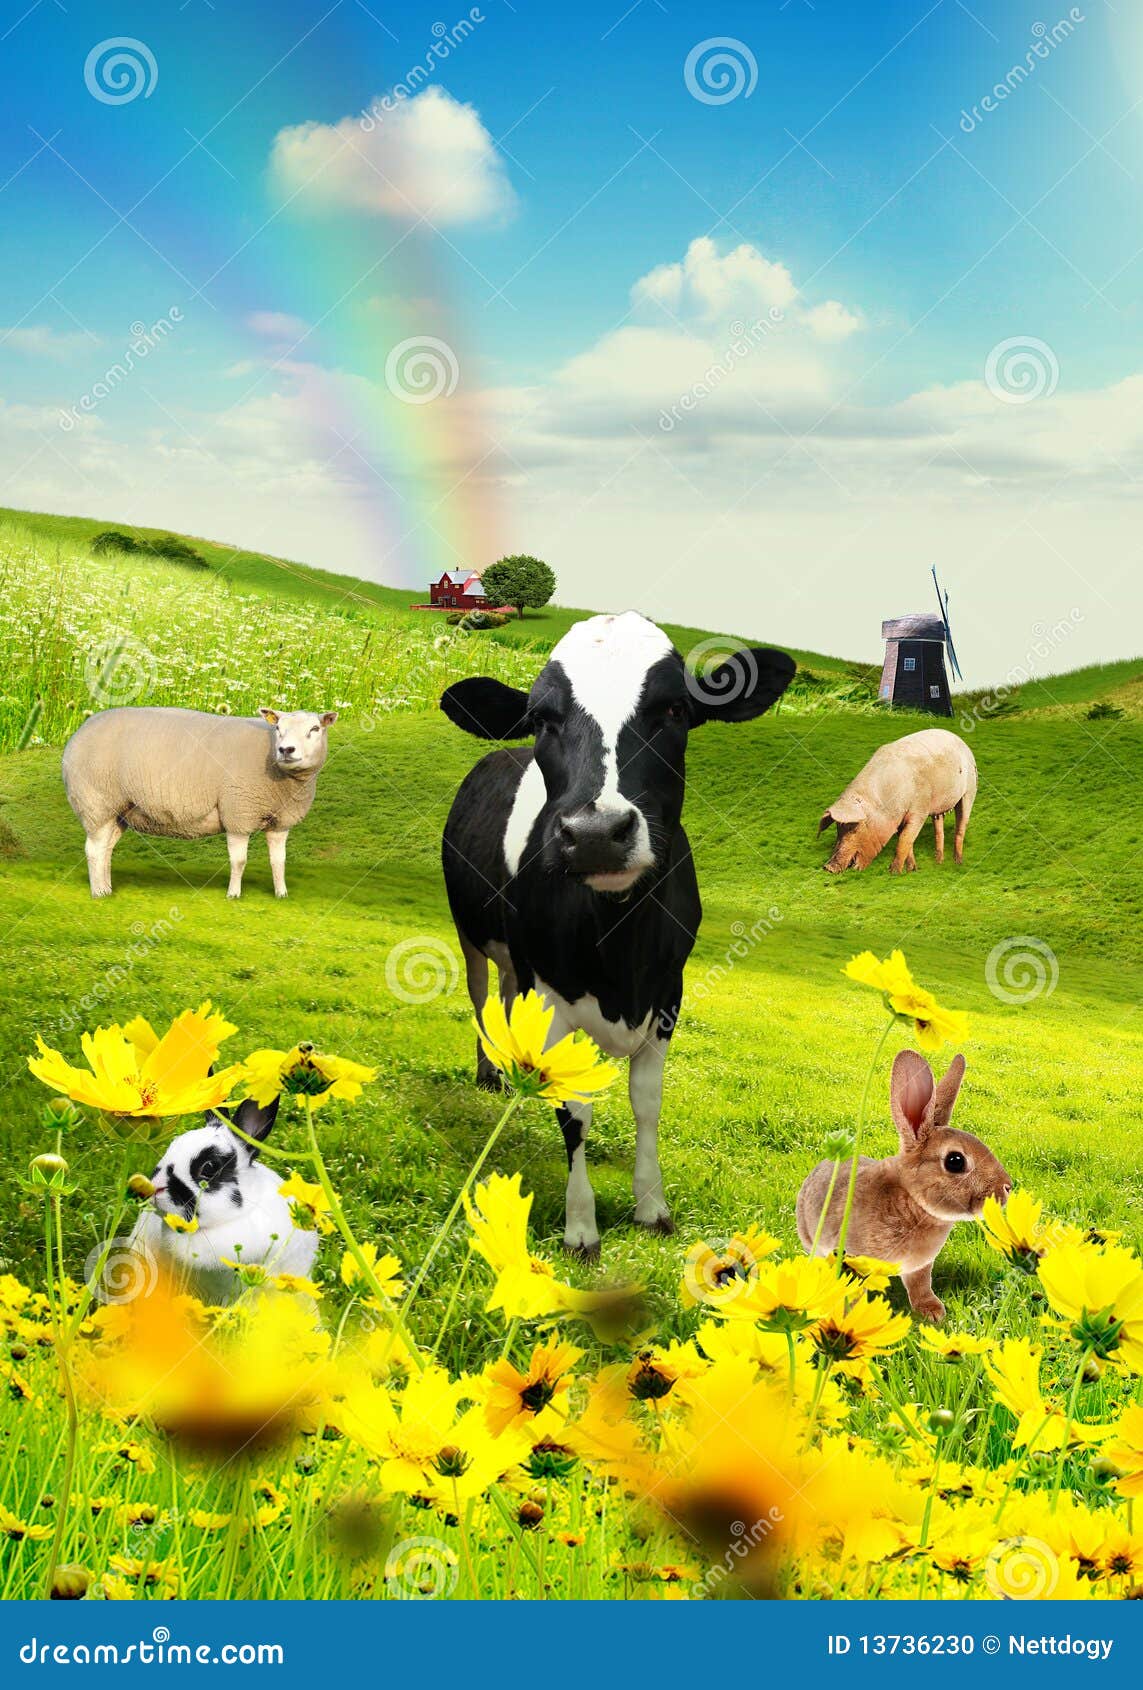 Animals in field 2 stock photo. Image of collage, live - 13736230